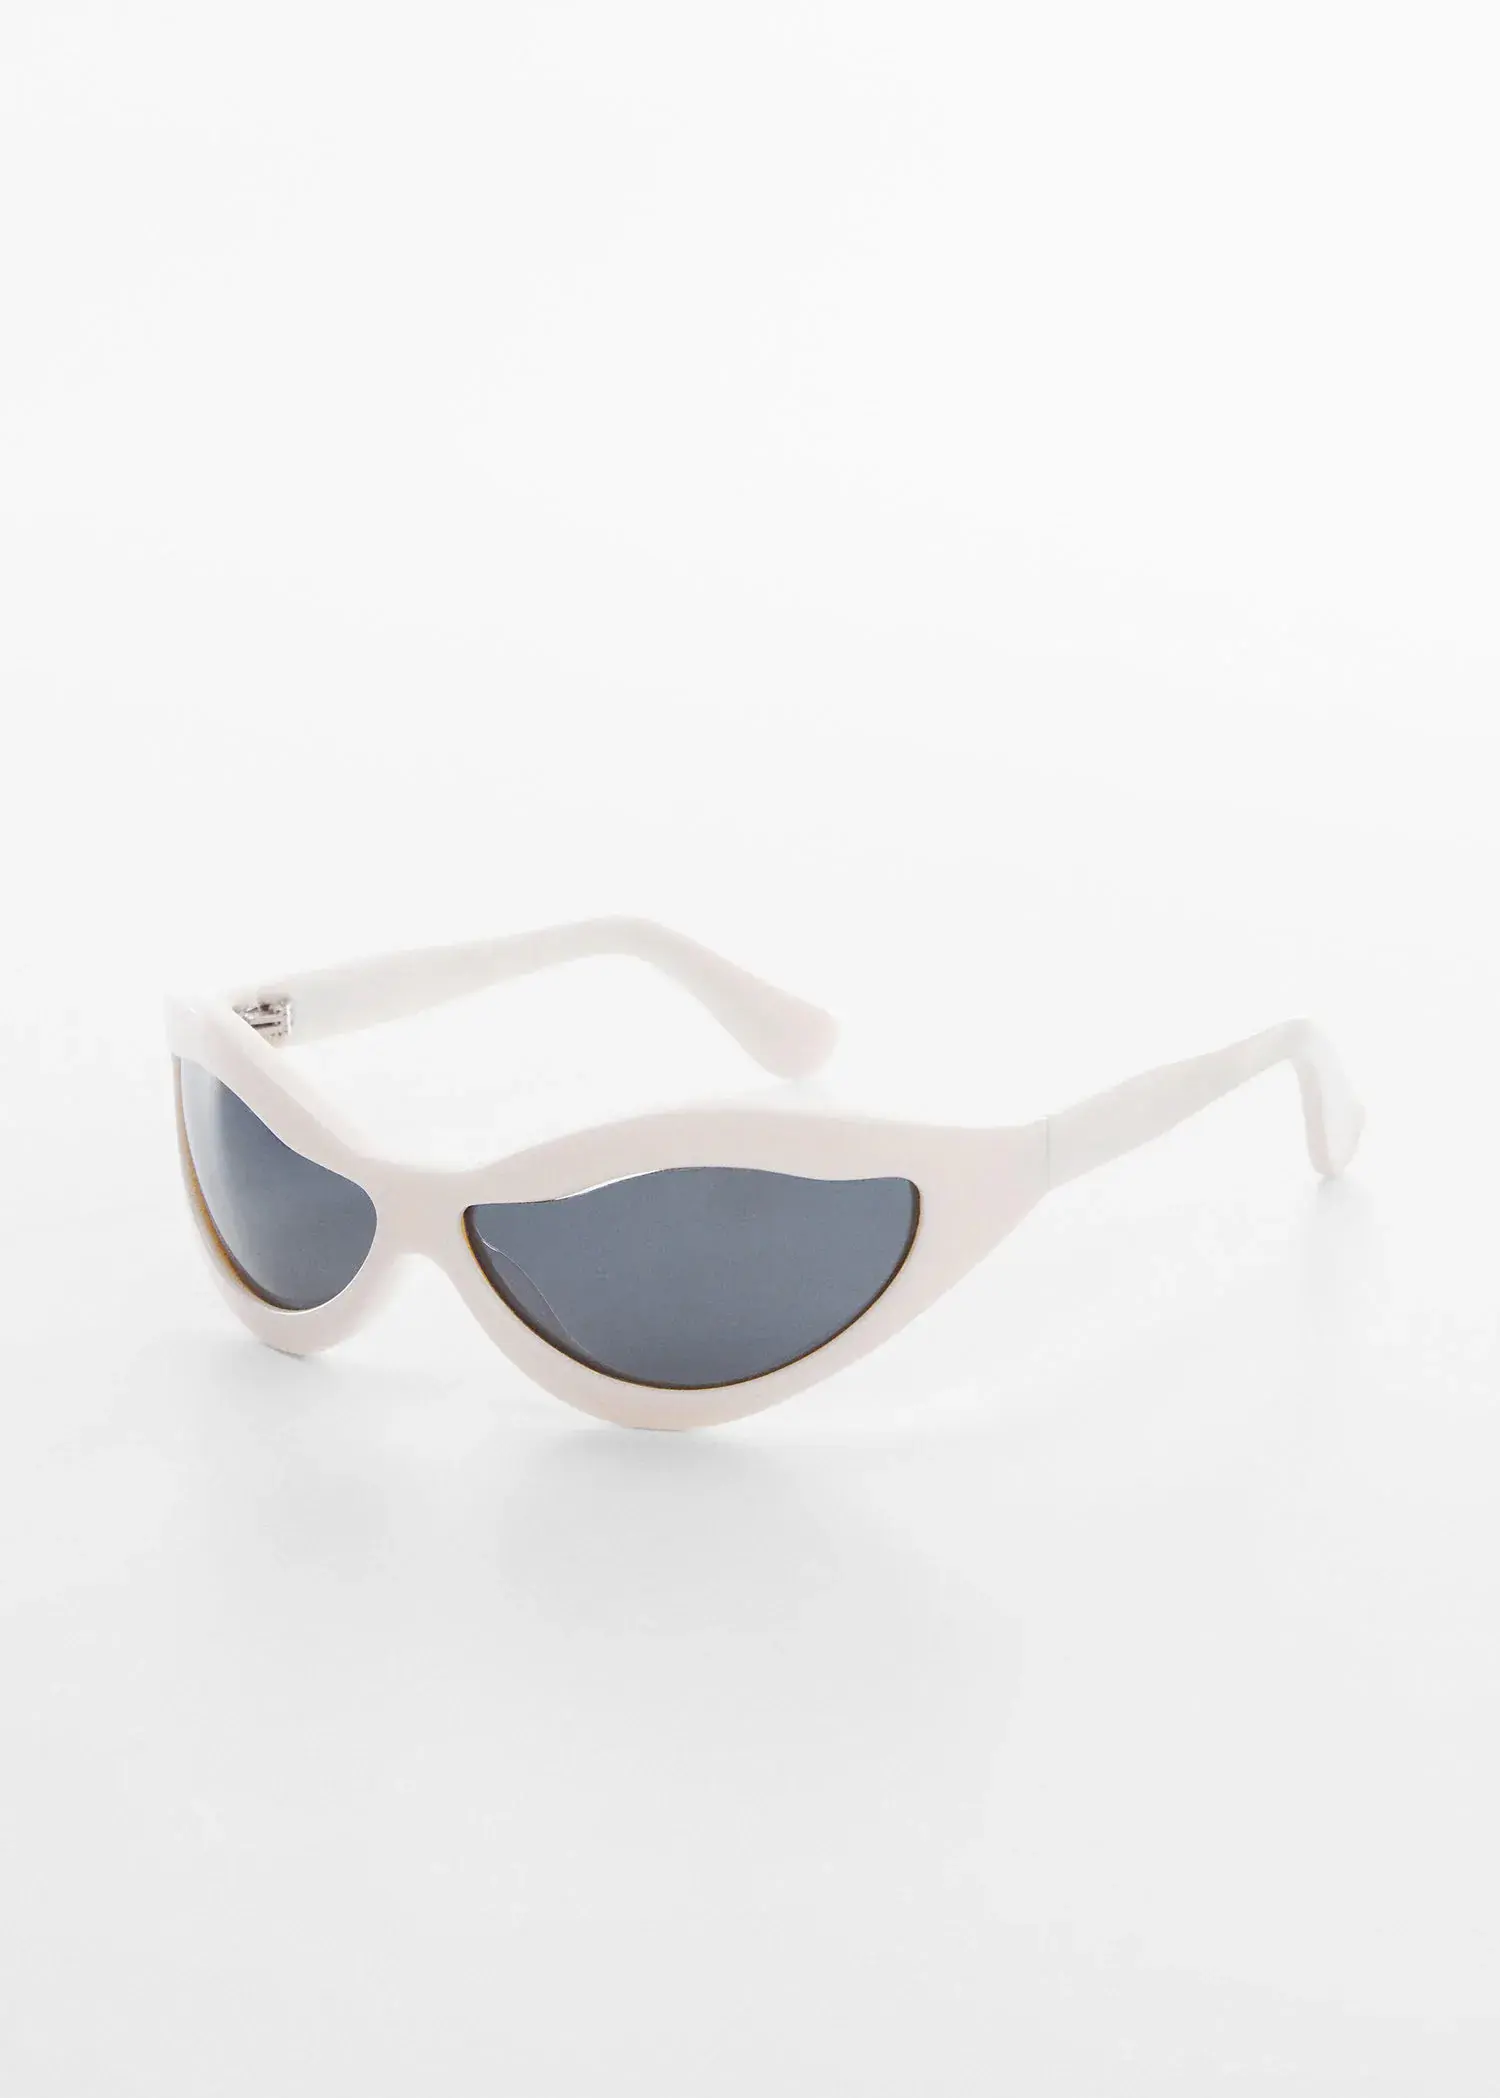 Mango Irregular crystals sunglasses. a pair of white sunglasses on a white surface. 